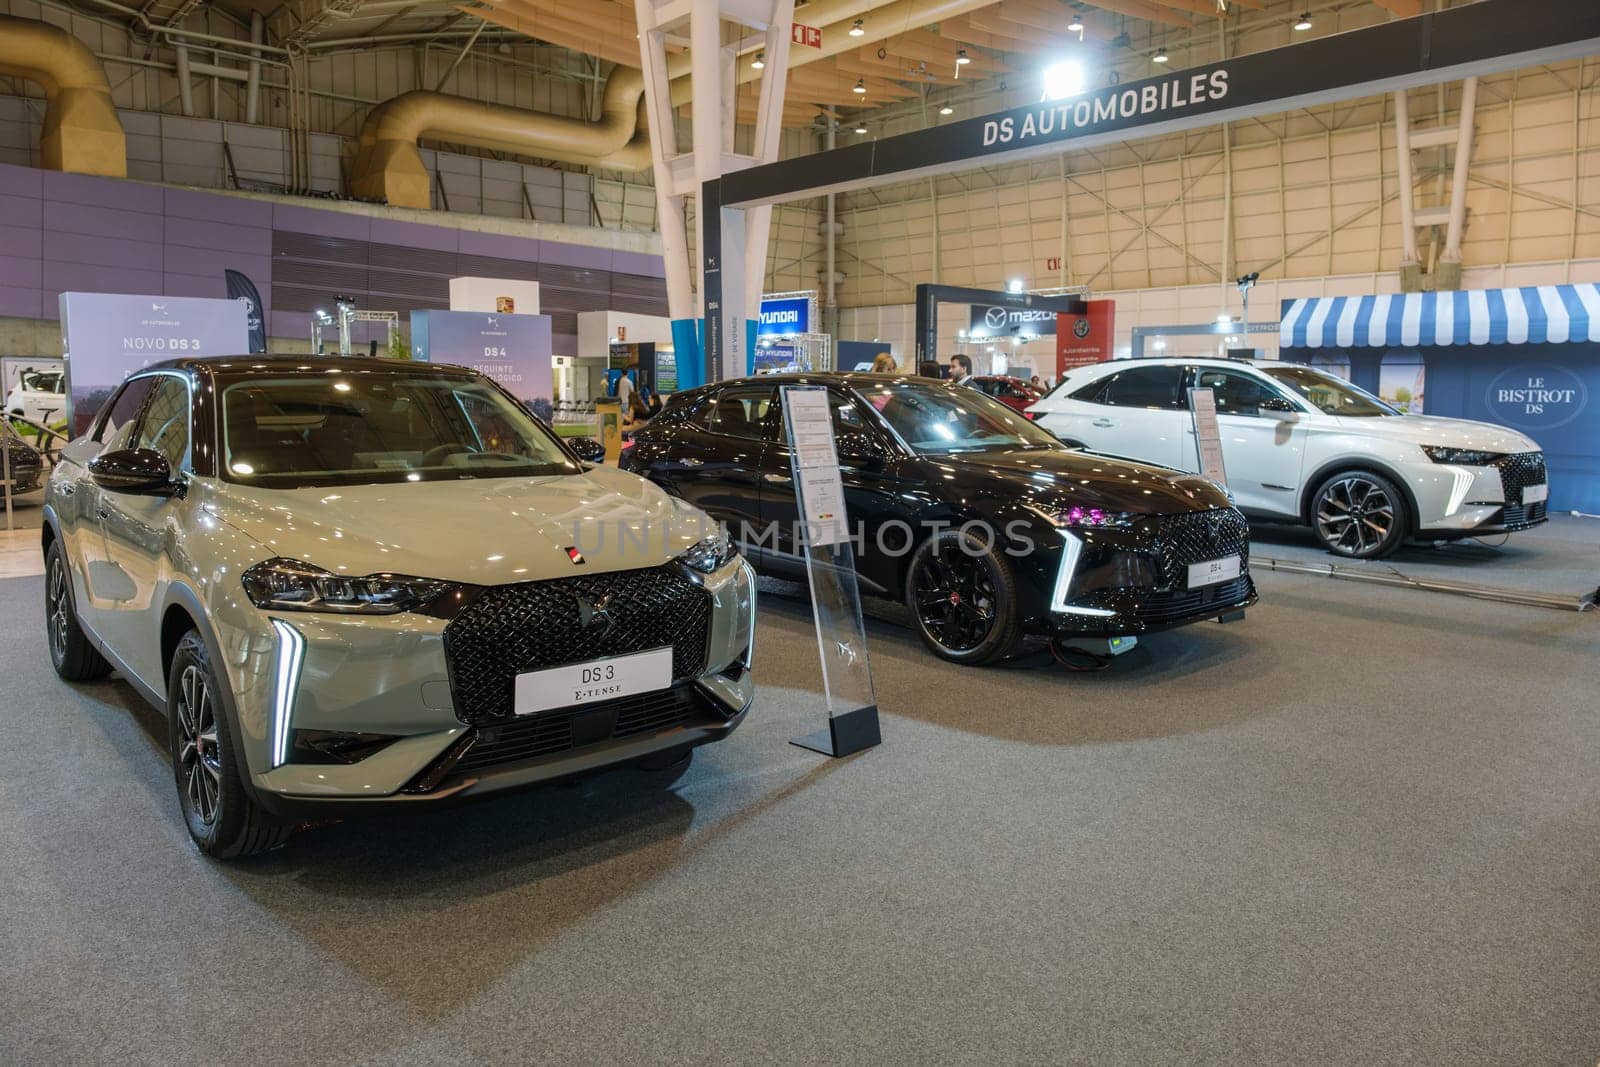 DS 3 Electric, DS 4 and DS 7 hybrid cars at ECAR SHOW - Hybrid and Electric Motor Show by dimol